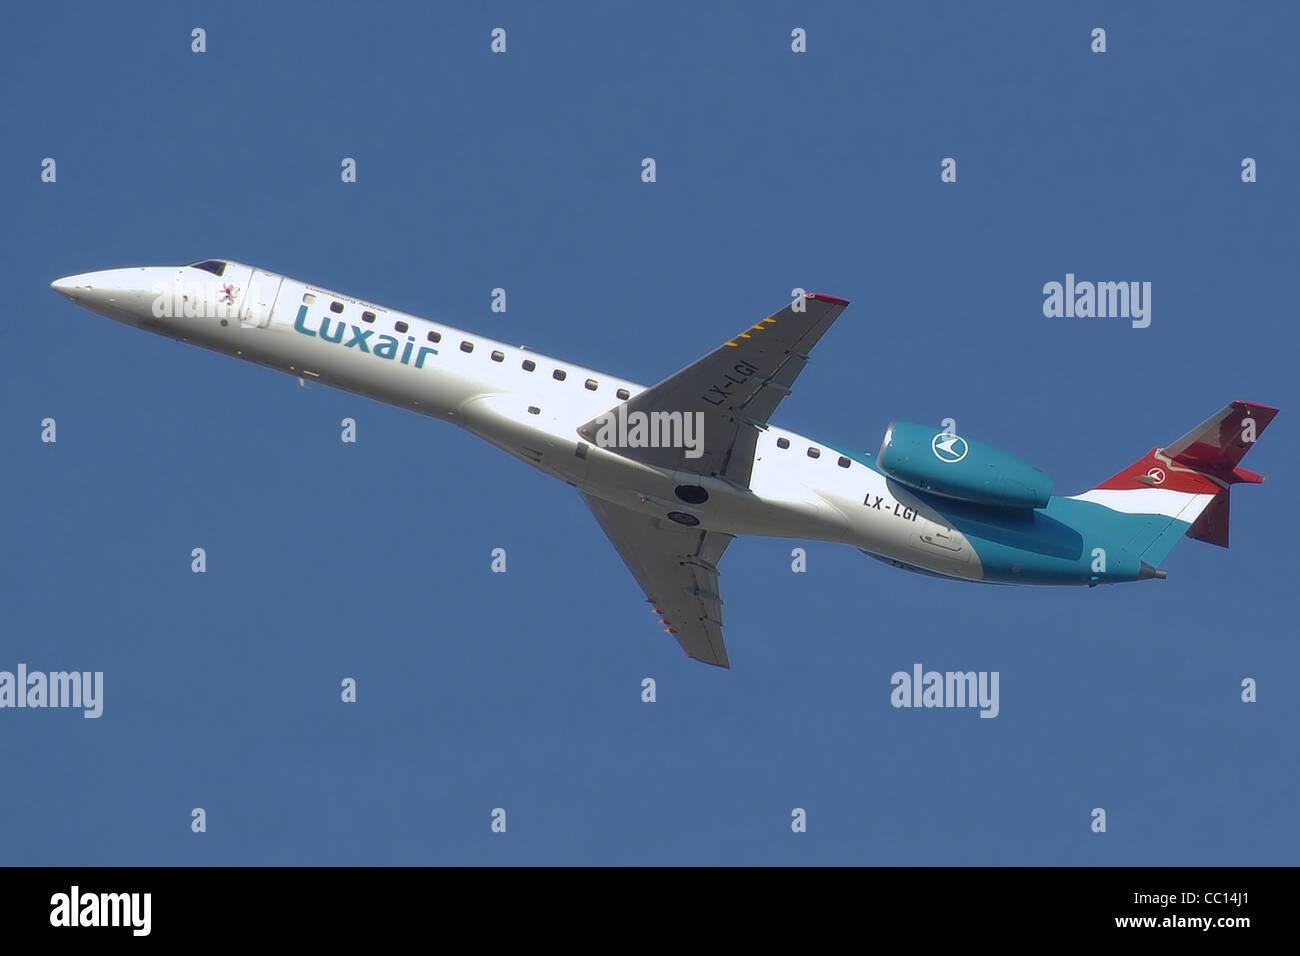 Luxair Embraer ERJ 145 (LX-LGI) takes off from London Heathrow Airport, England. Stock Photo